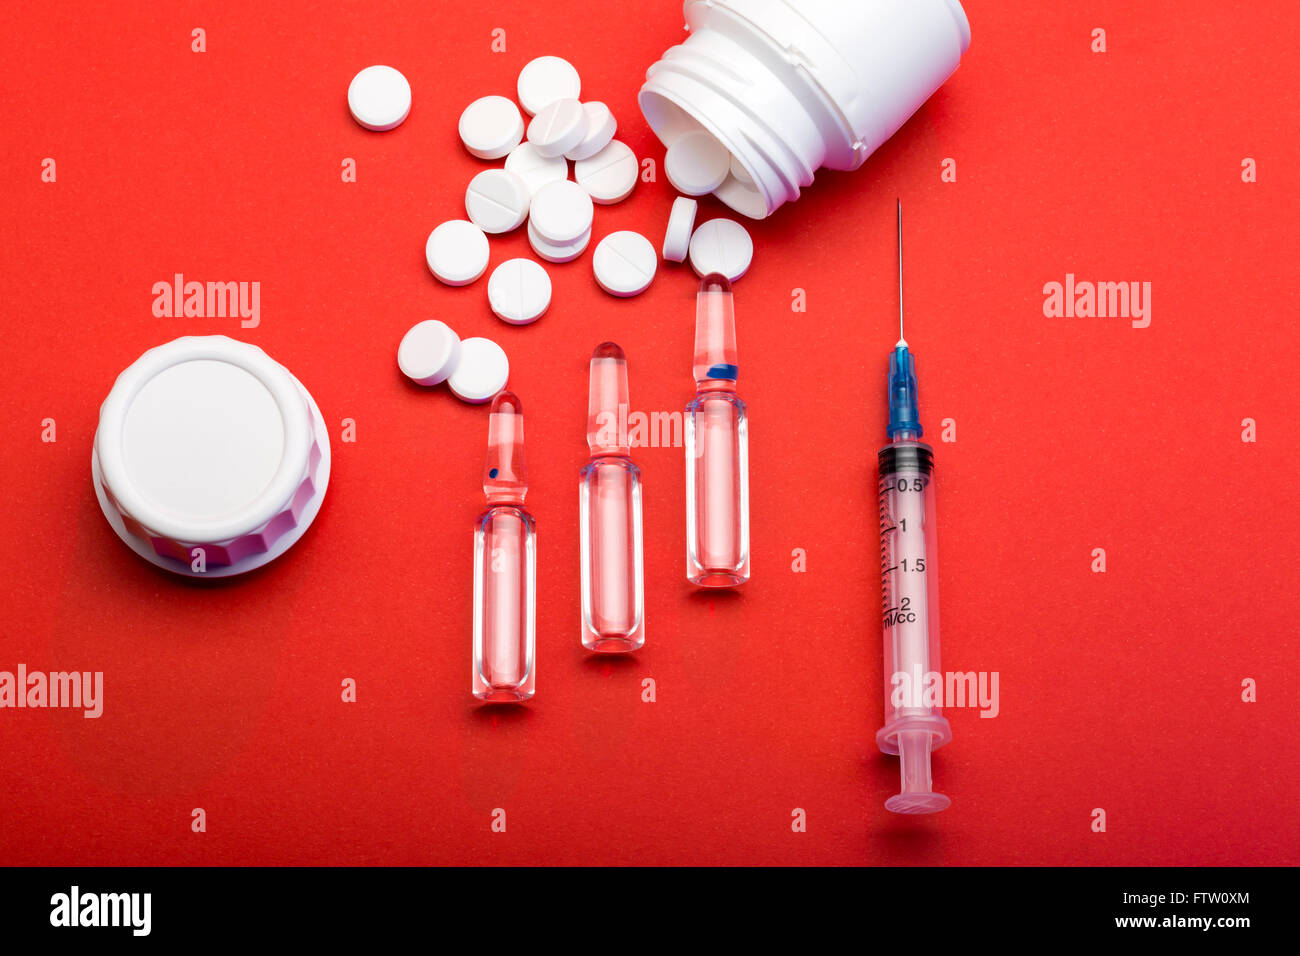 Disposable syringe for injection, ampoules, white round pills and pill bottles Stock Photo